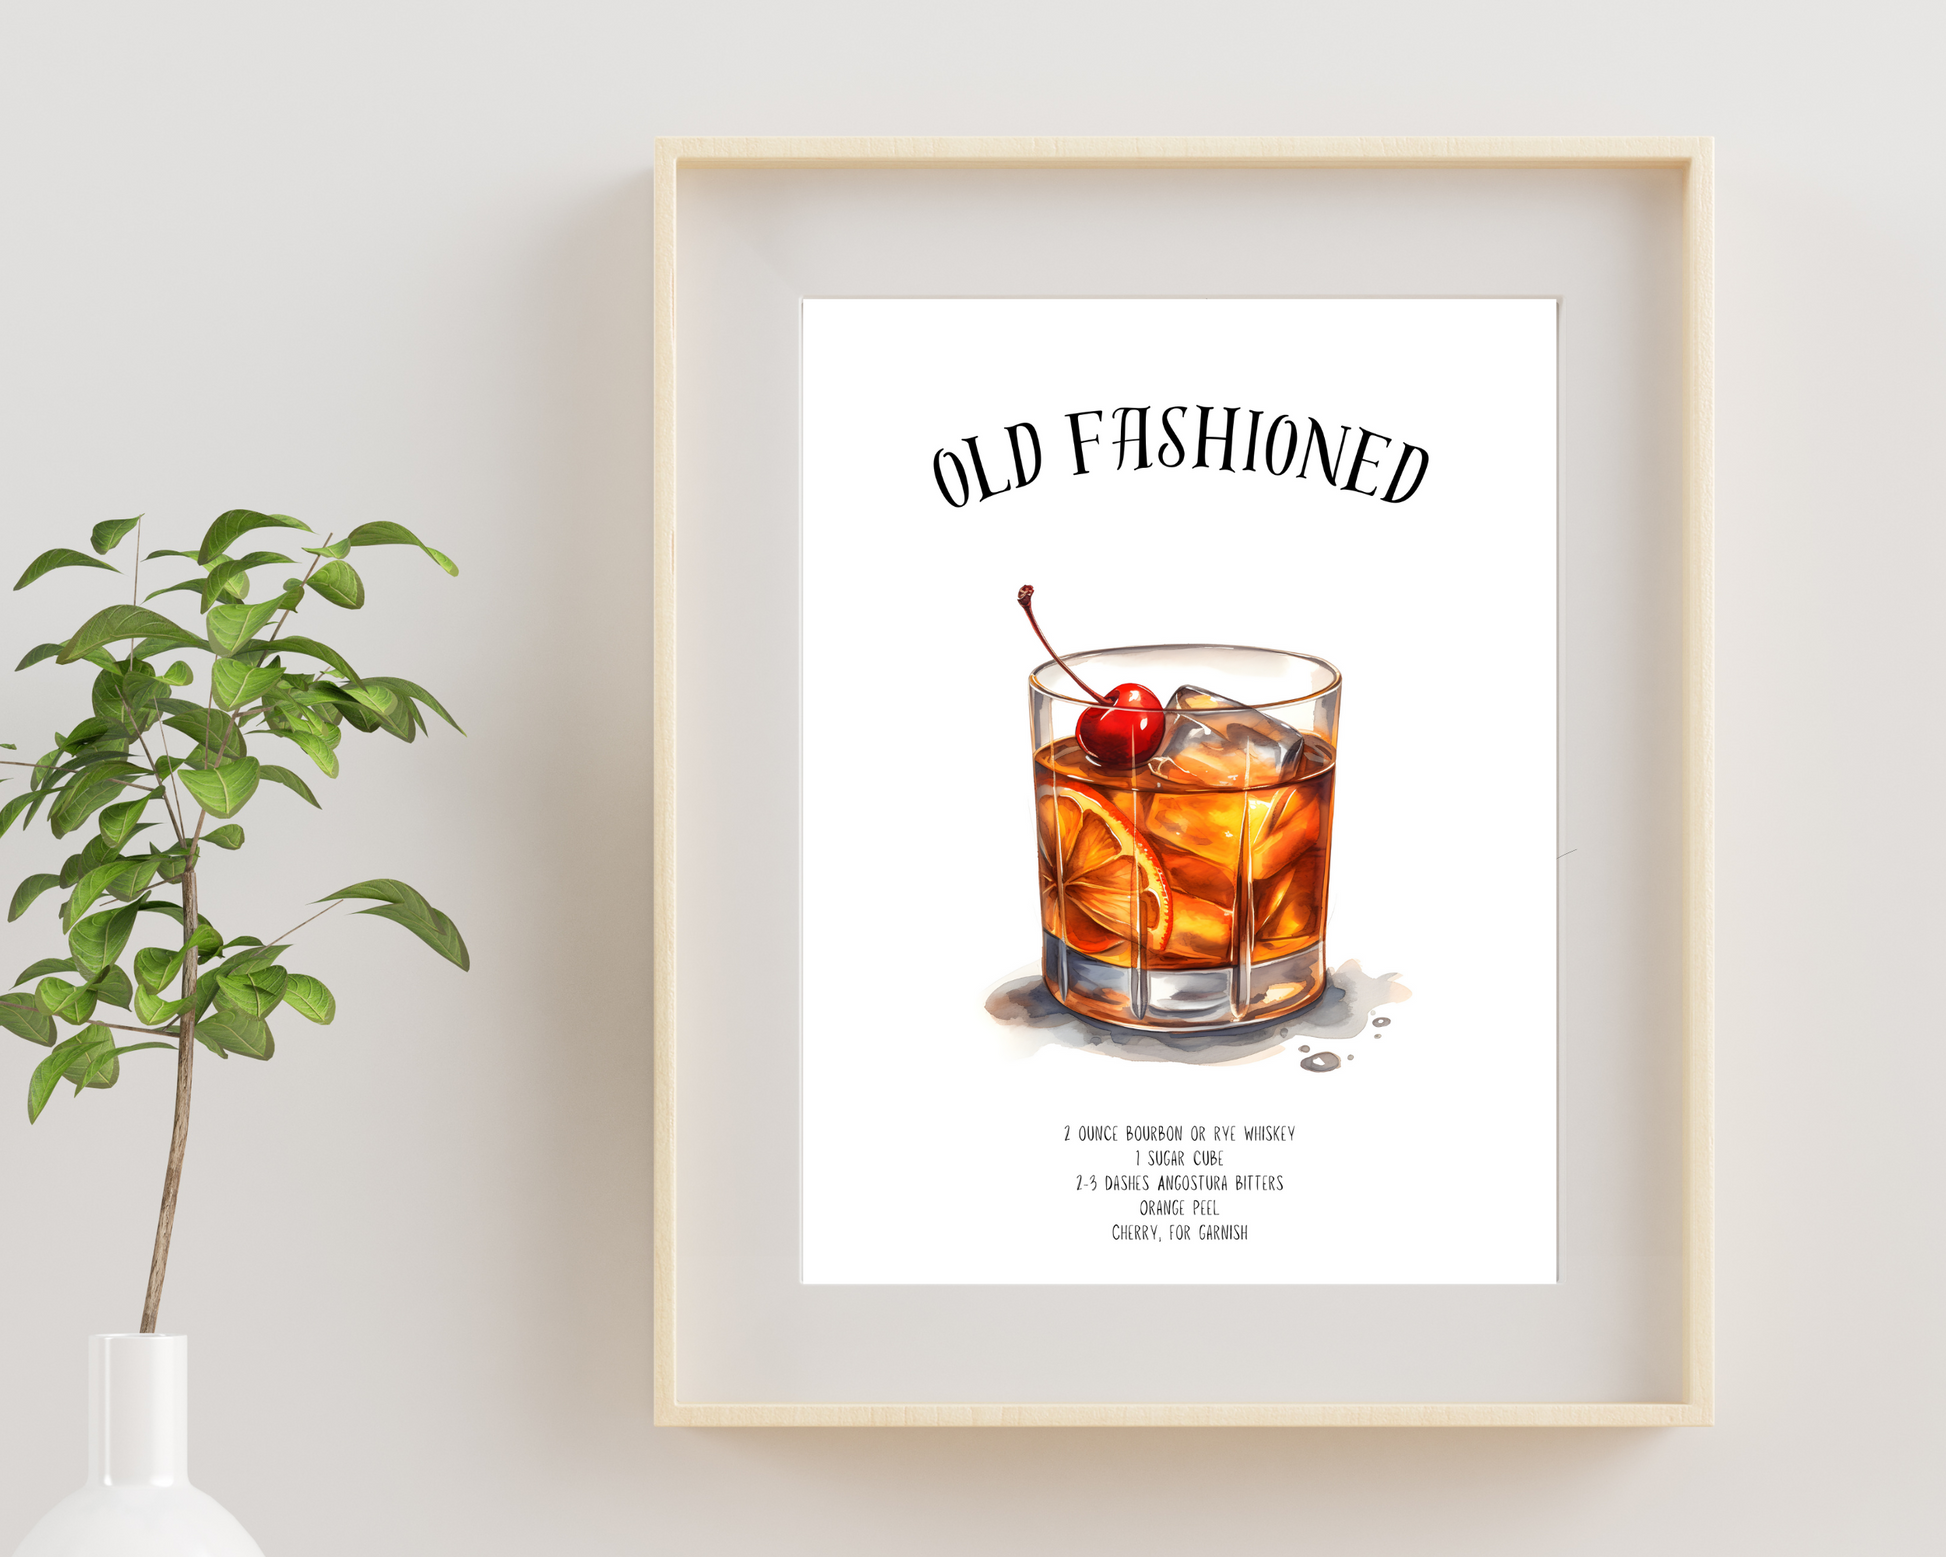 Old Fashioned Cocktail Poster Print - Pitchers Design